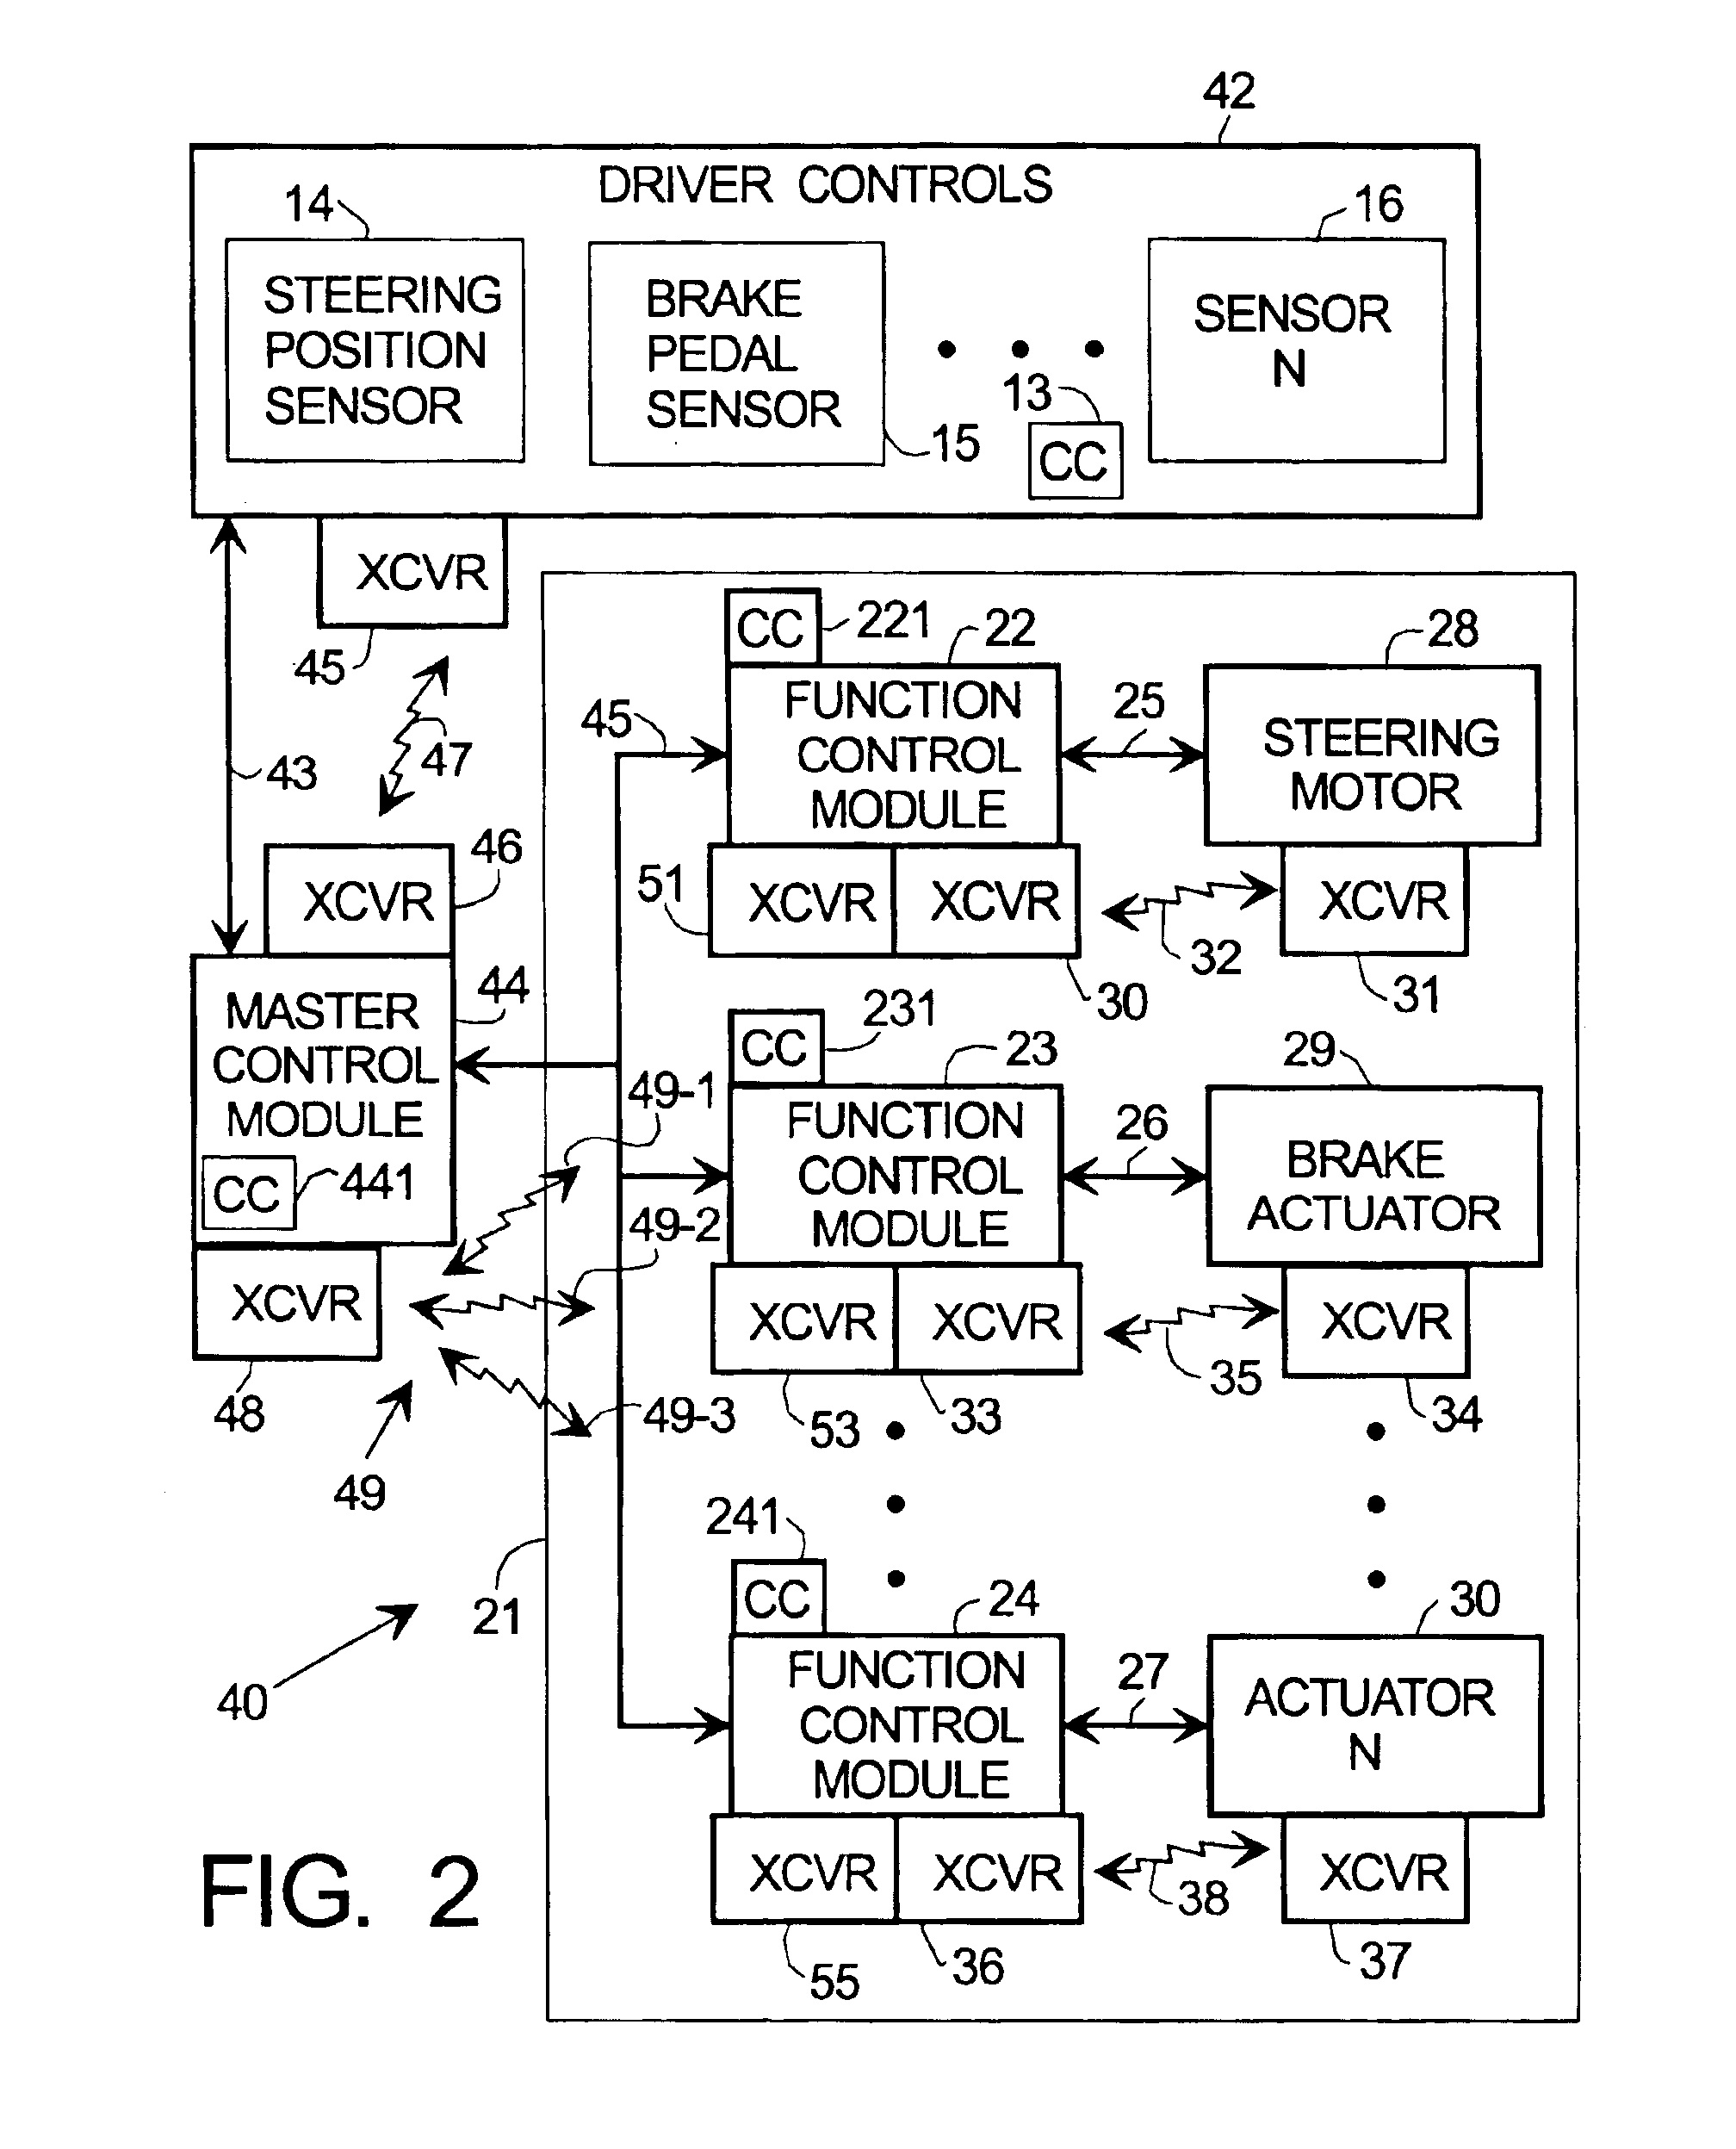 Wireless backup communication link for vehicle control